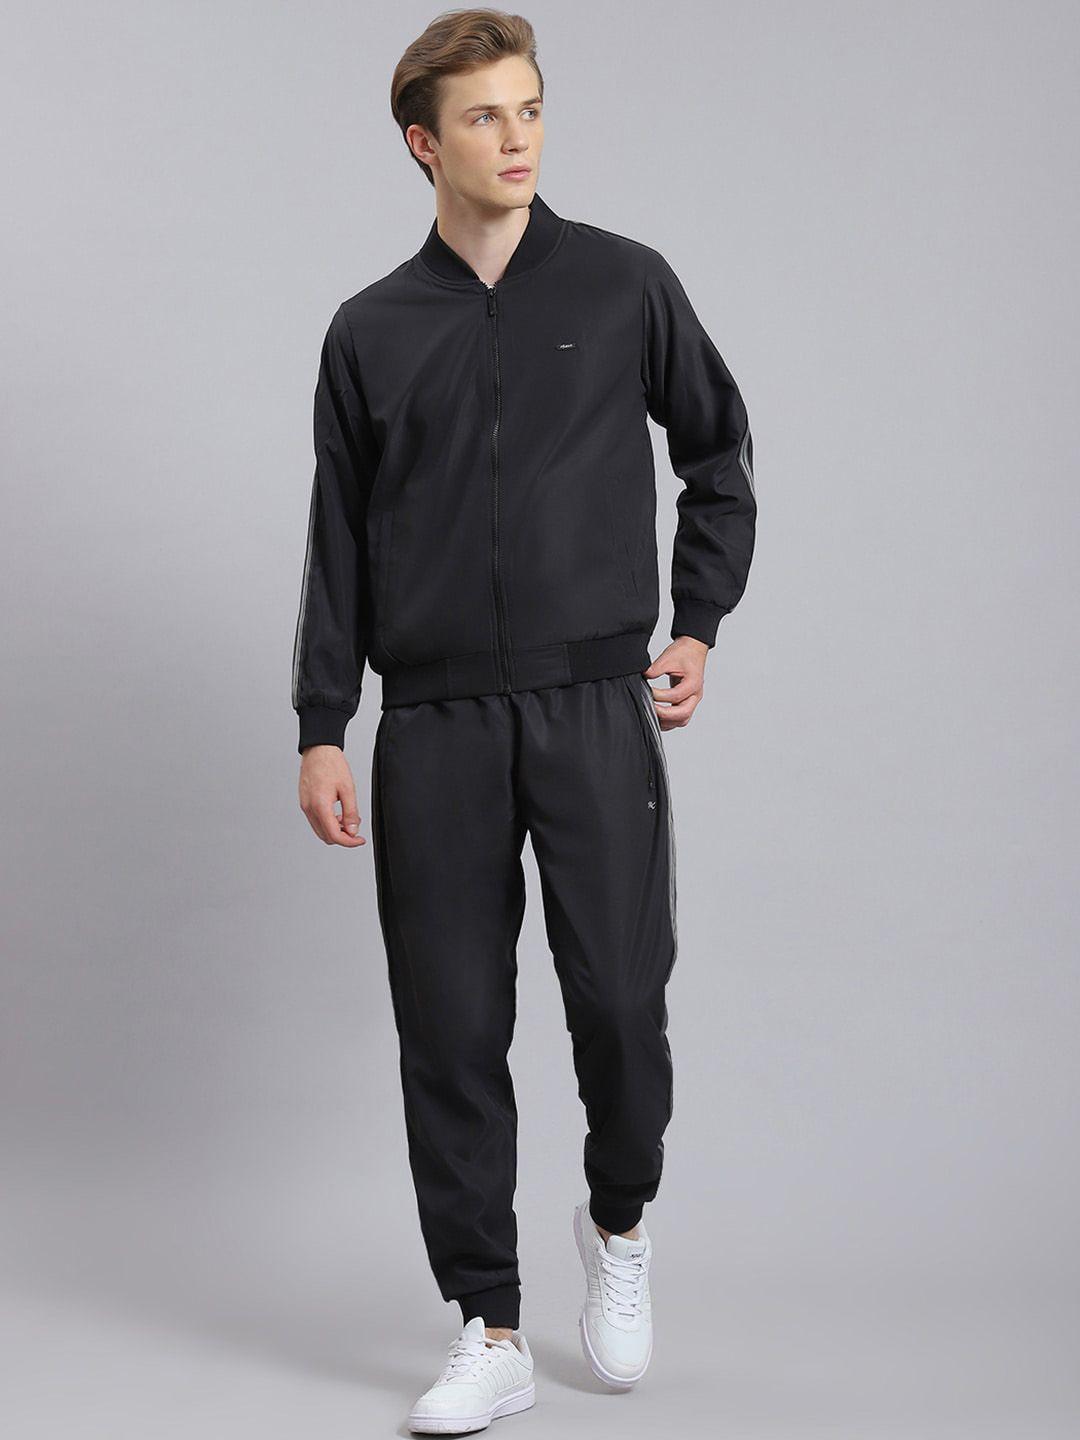 monte carlo mock collar long sleeves tracksuits